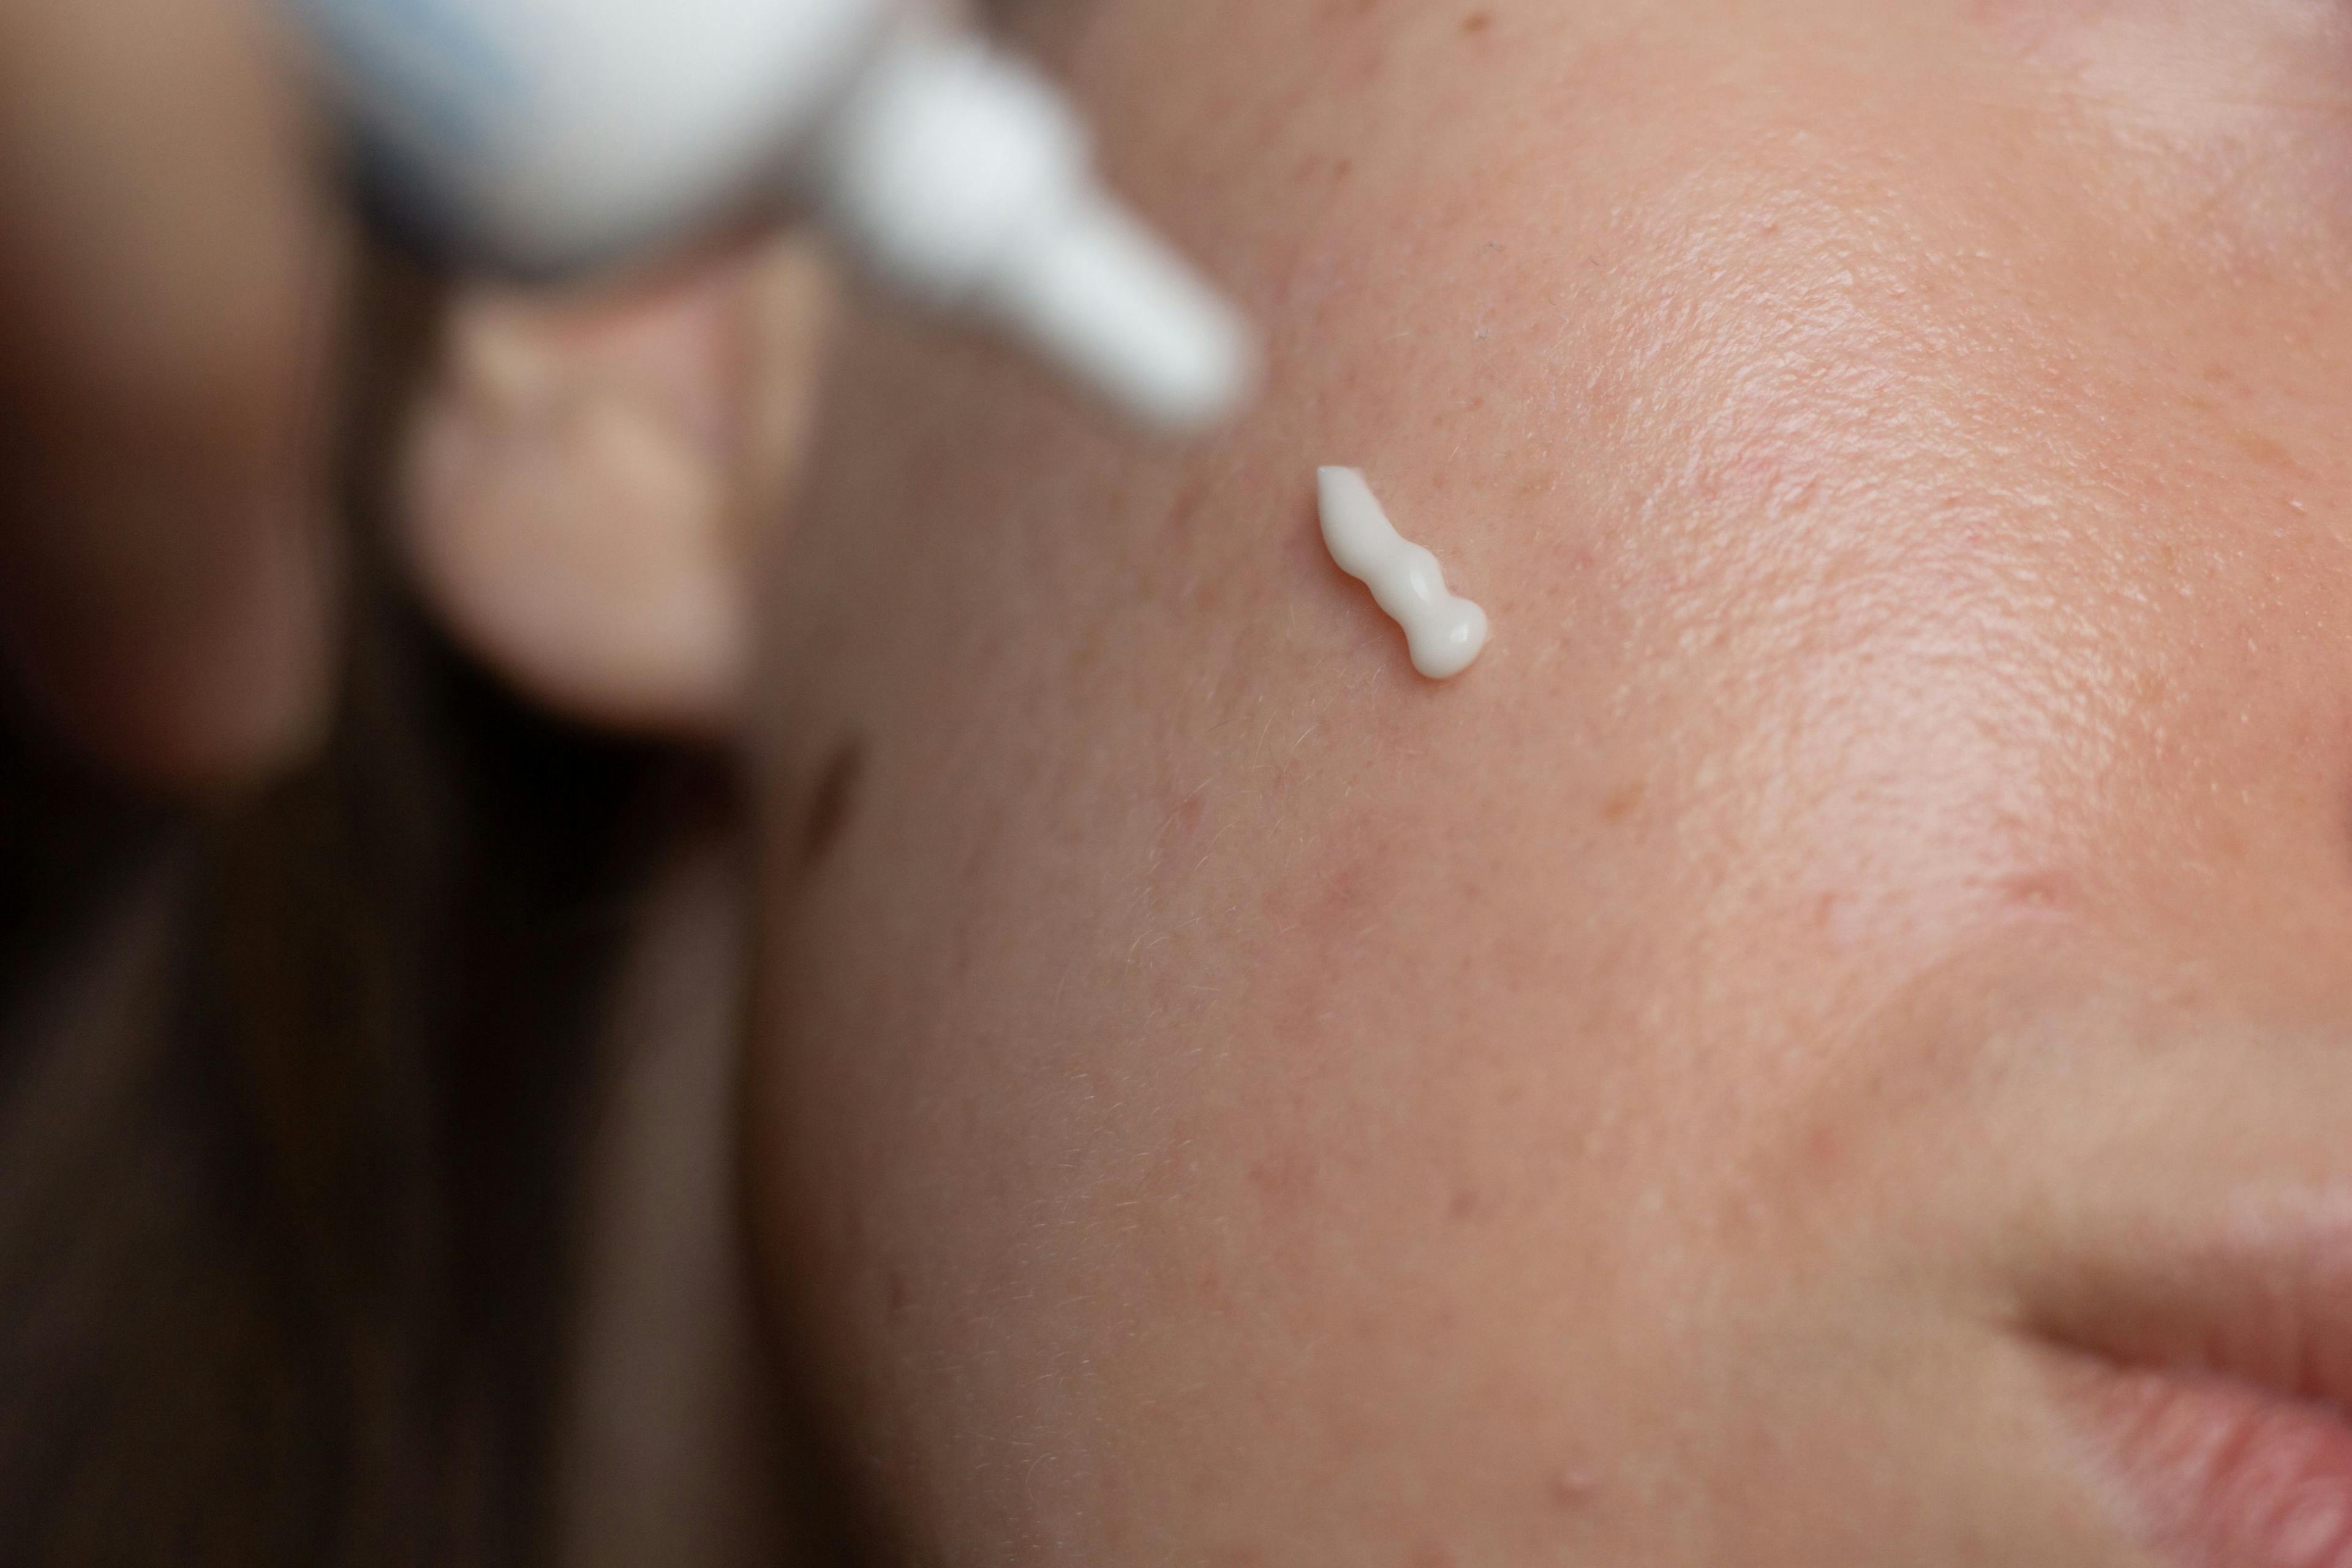 POLL: Have You Heard of the New AAD Acne Guidelines?